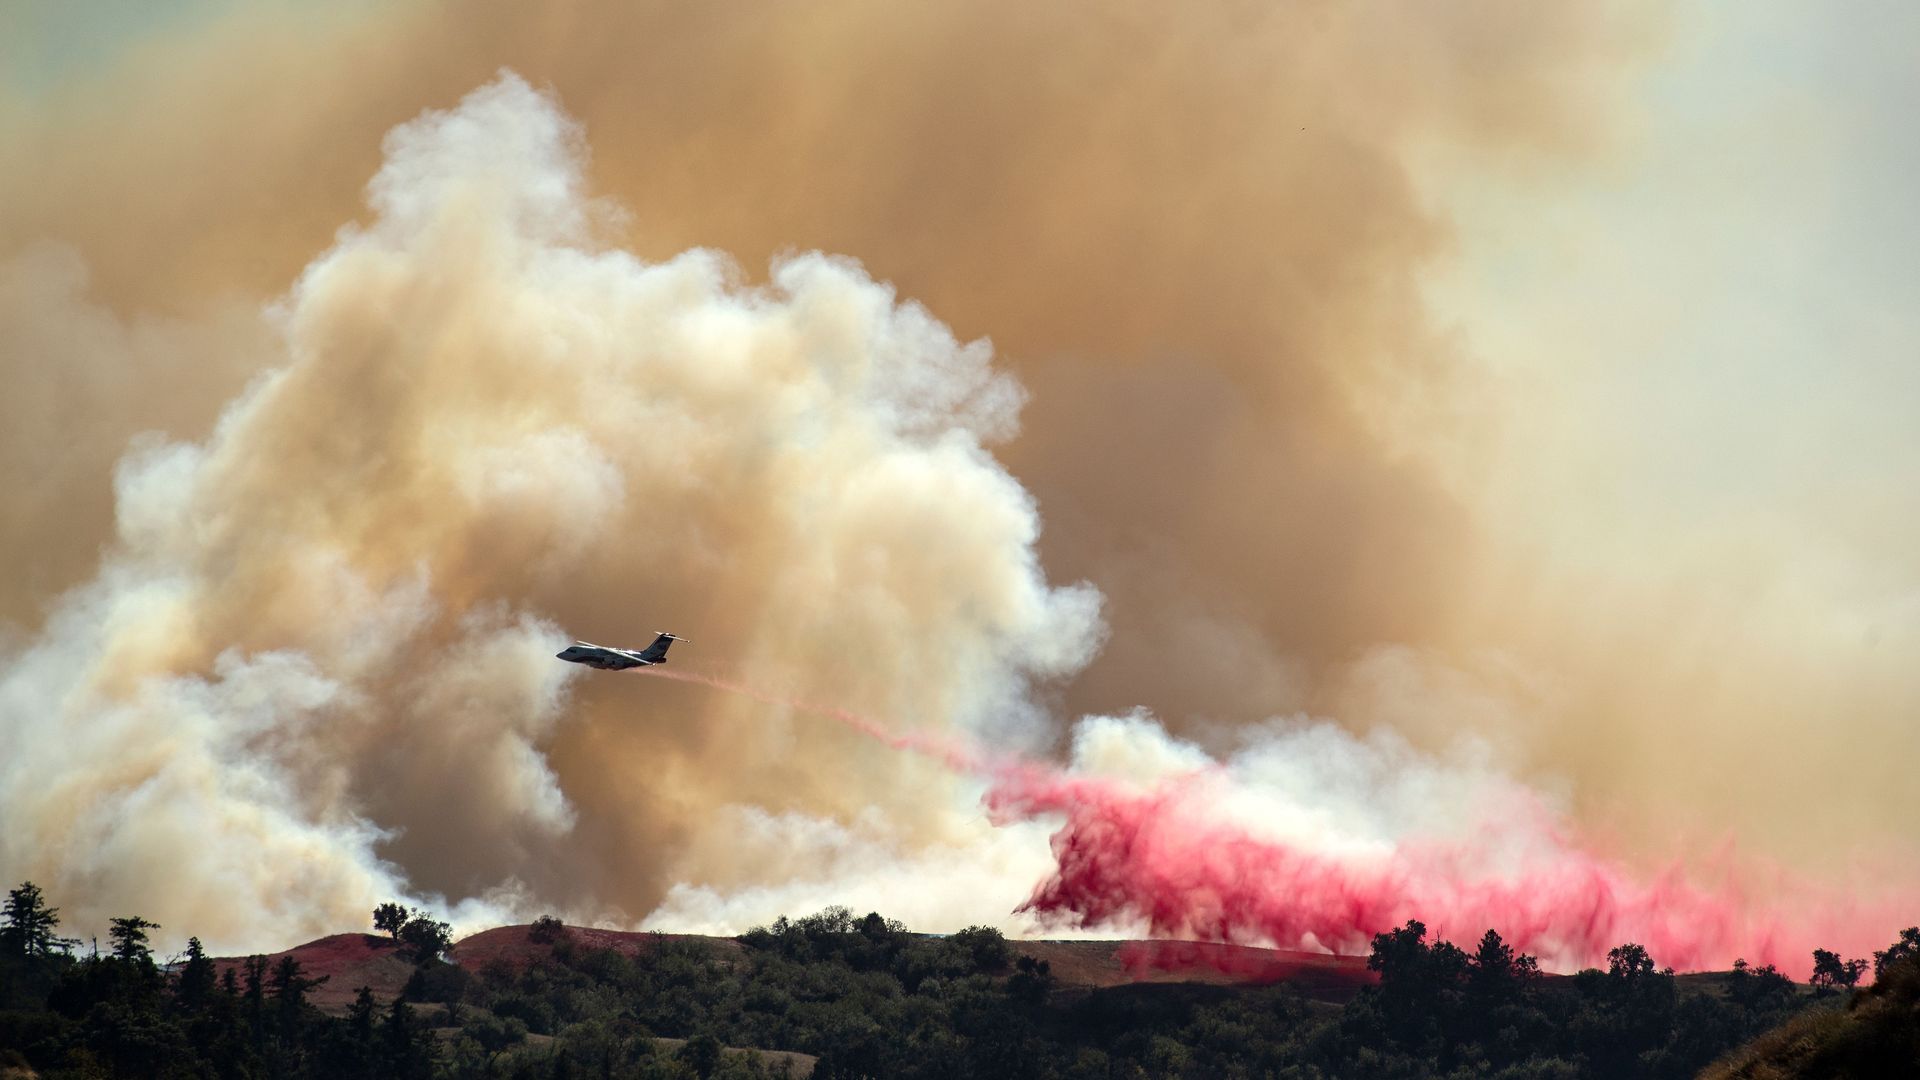 An aircraft helps fight the Saddleridge fire by dropping fire retardant along a ridge in Newhall, California on October 11, 2019